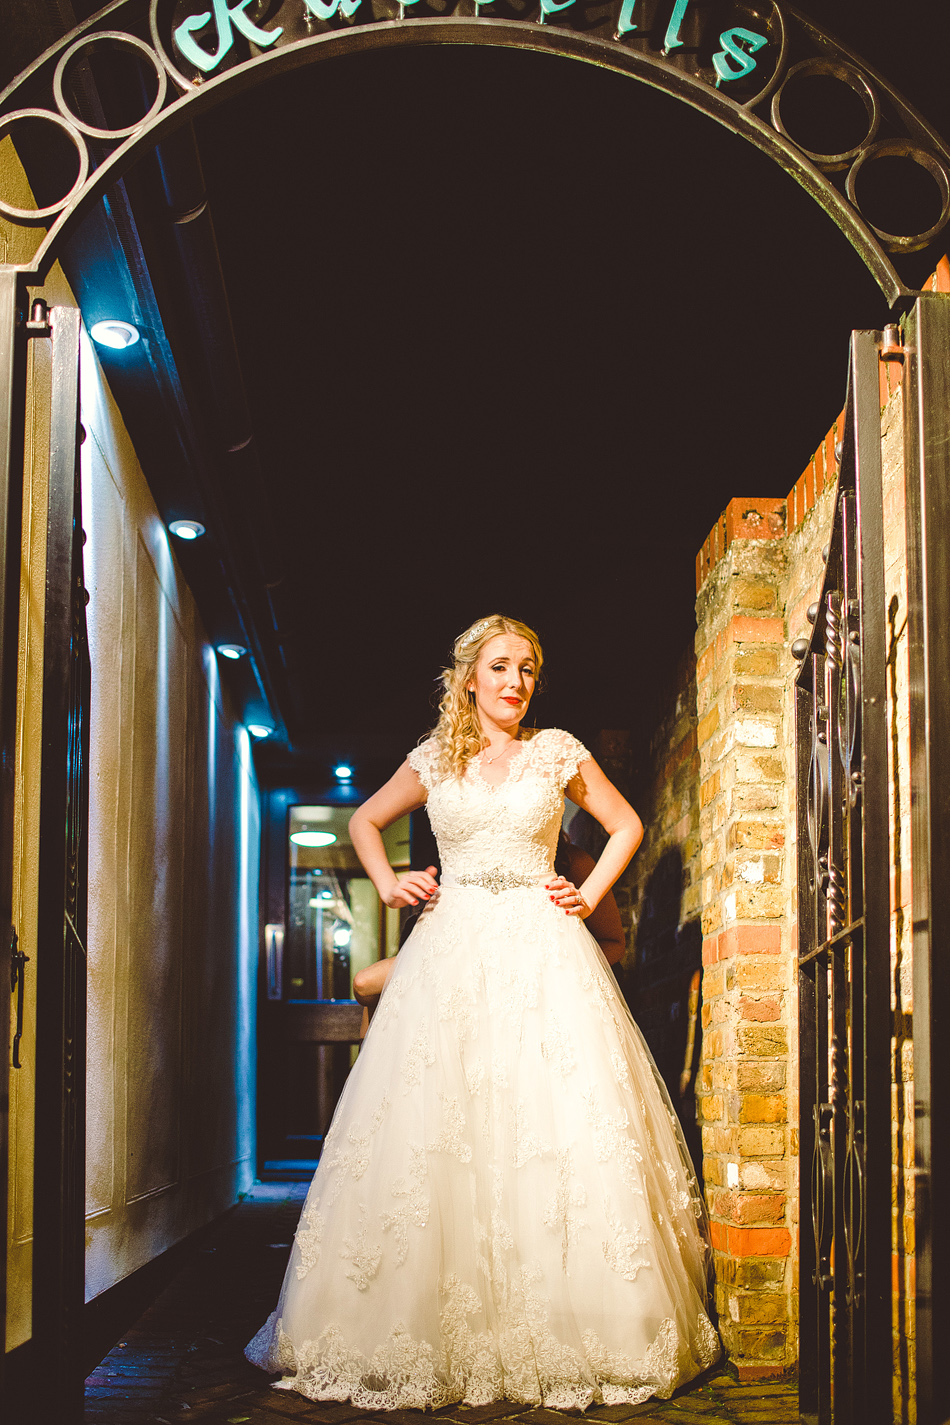 Chelmsford Wedding Photography, Chelmsford Wedding Photography | Laura and Dan